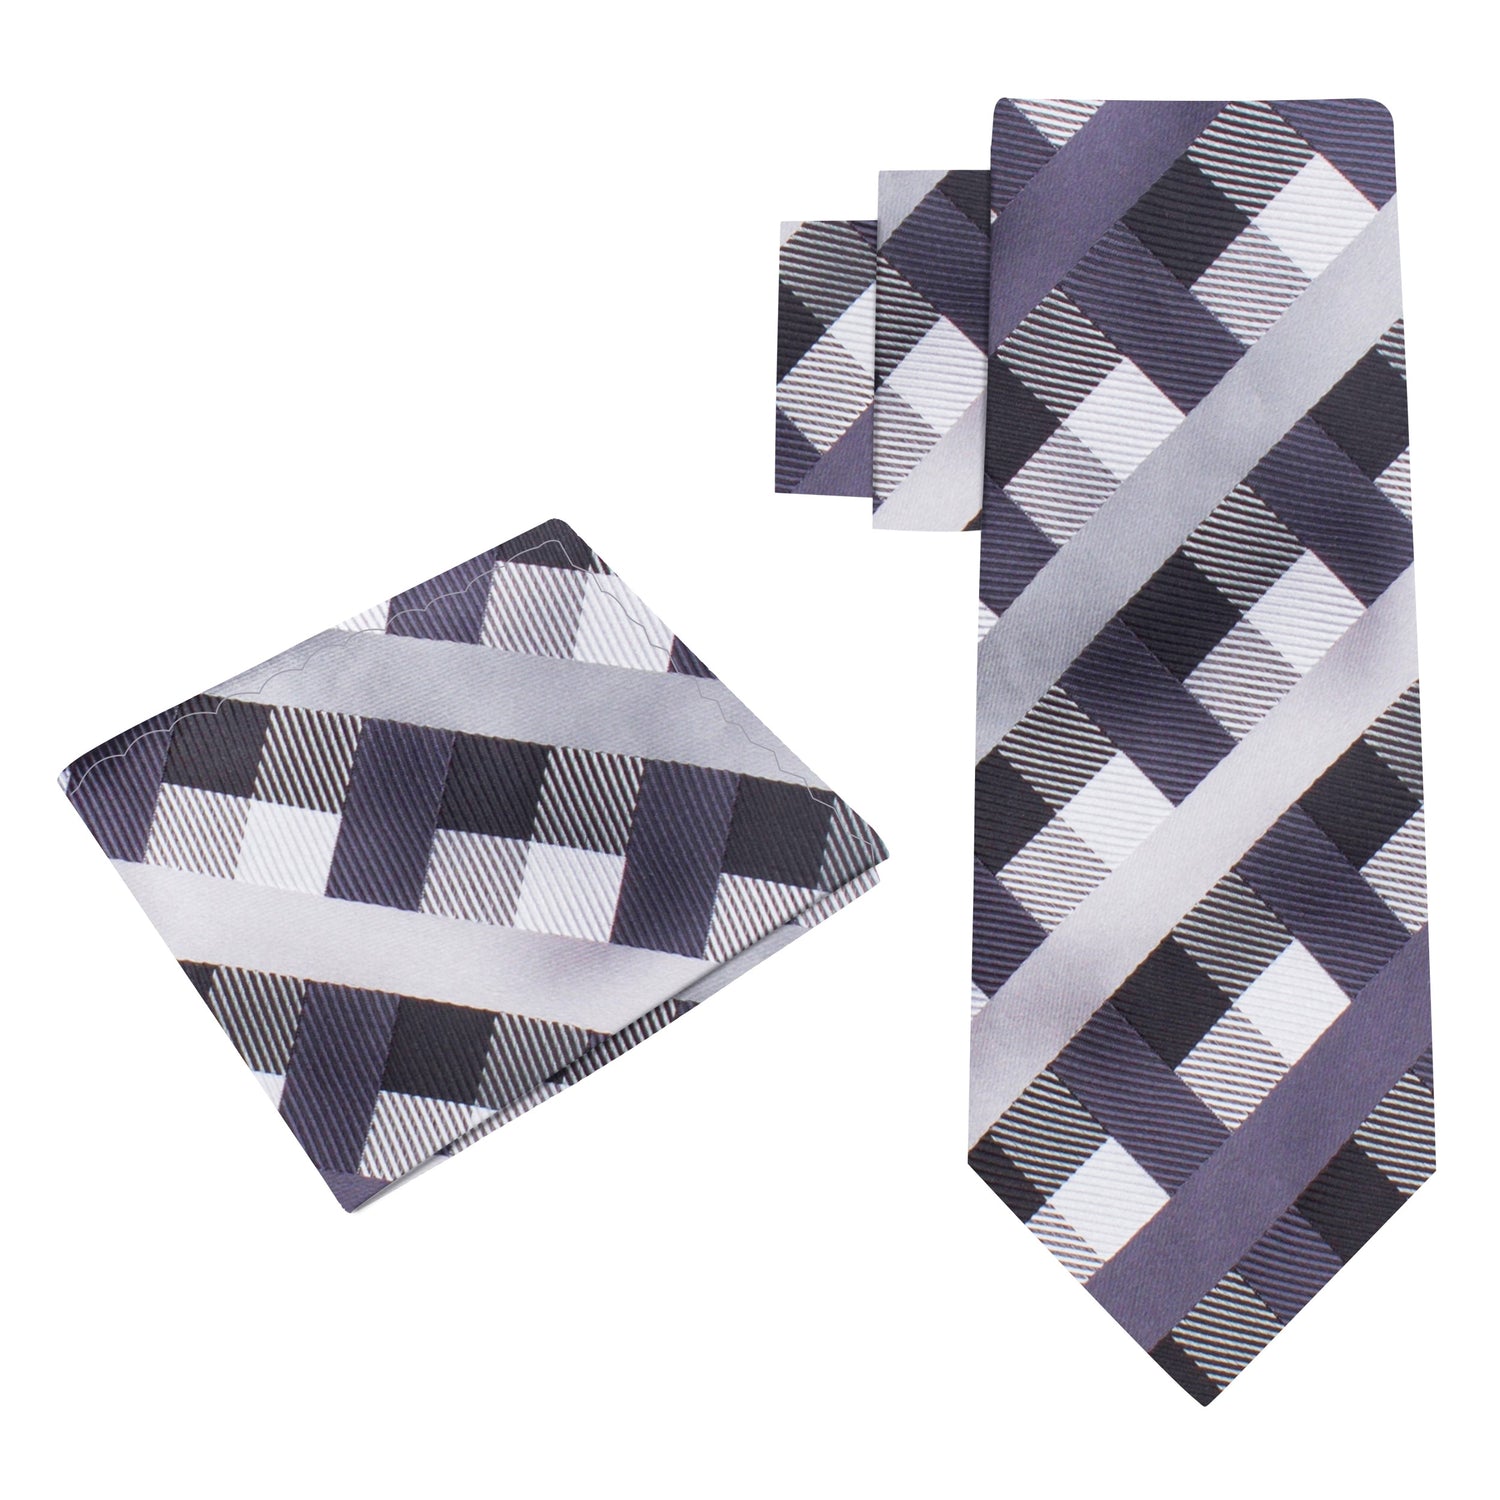 Alt View: Silver, Black Check Tie and Pocket Square